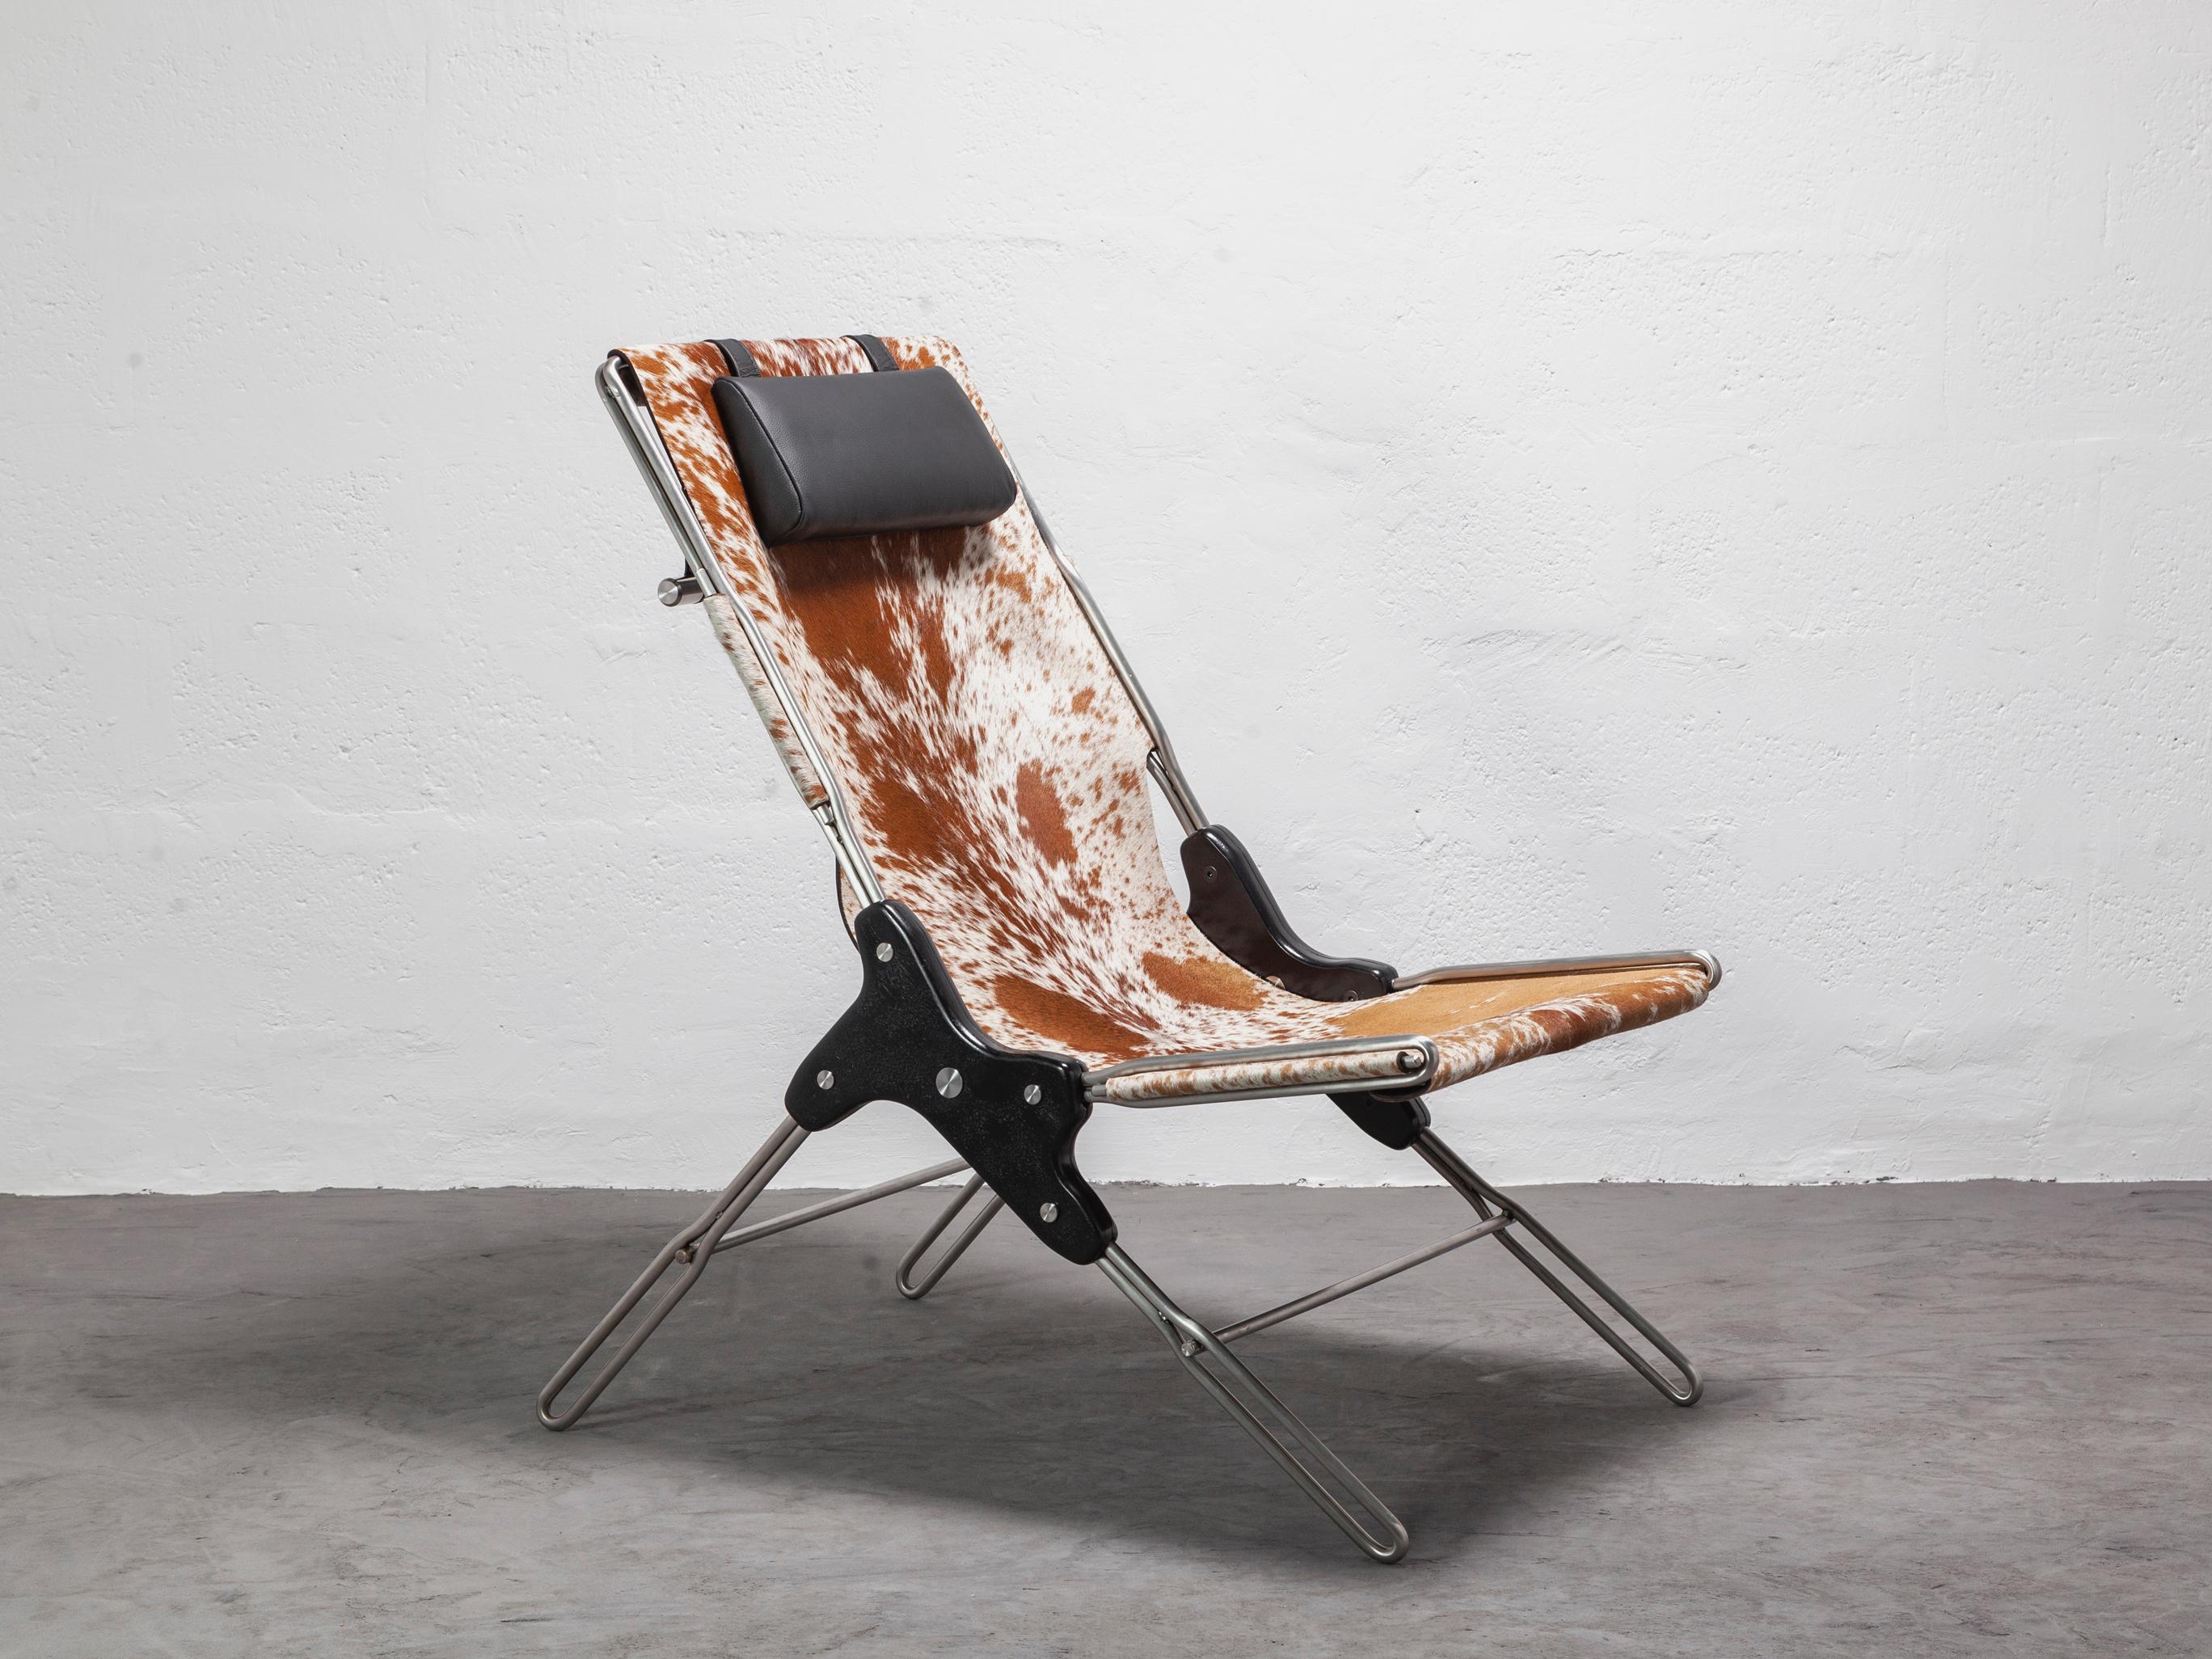 One-of-a-kind lounge chair made of stainless steel rod structure and solid colorado wood with a natural oil finish, Ecuadorian cowhide leather seat, and lathed bronze or stainless steel hardware.

The first Perfidia collection, composed of 4 pieces